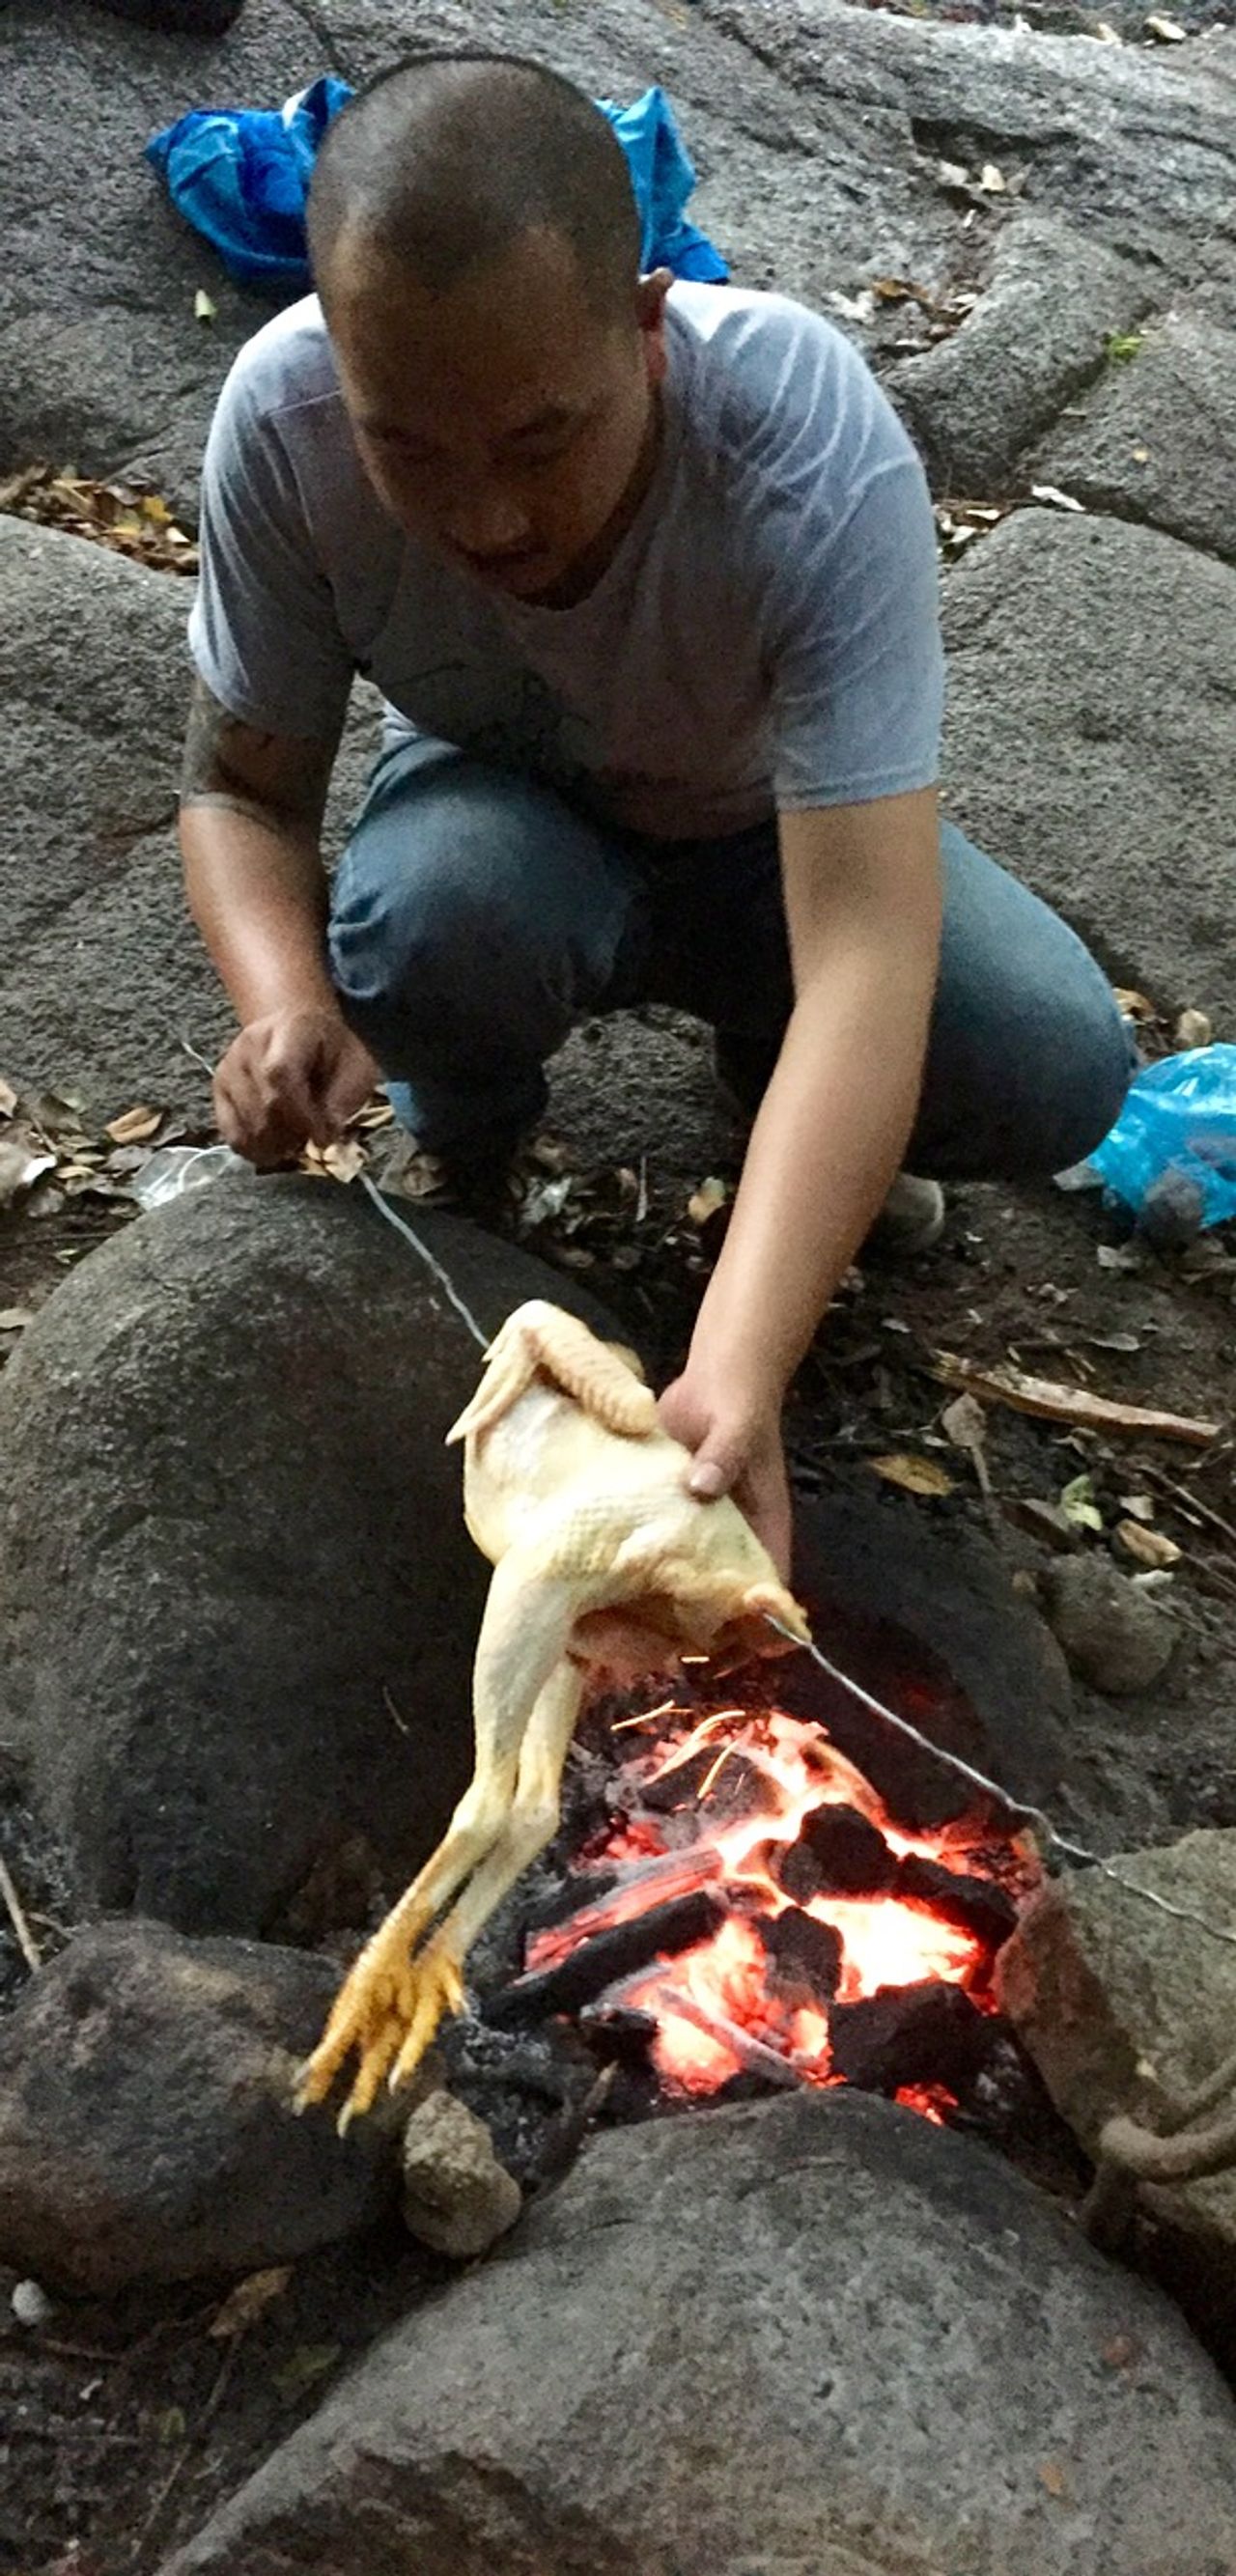 Man skewering a whole chicken over a fire.